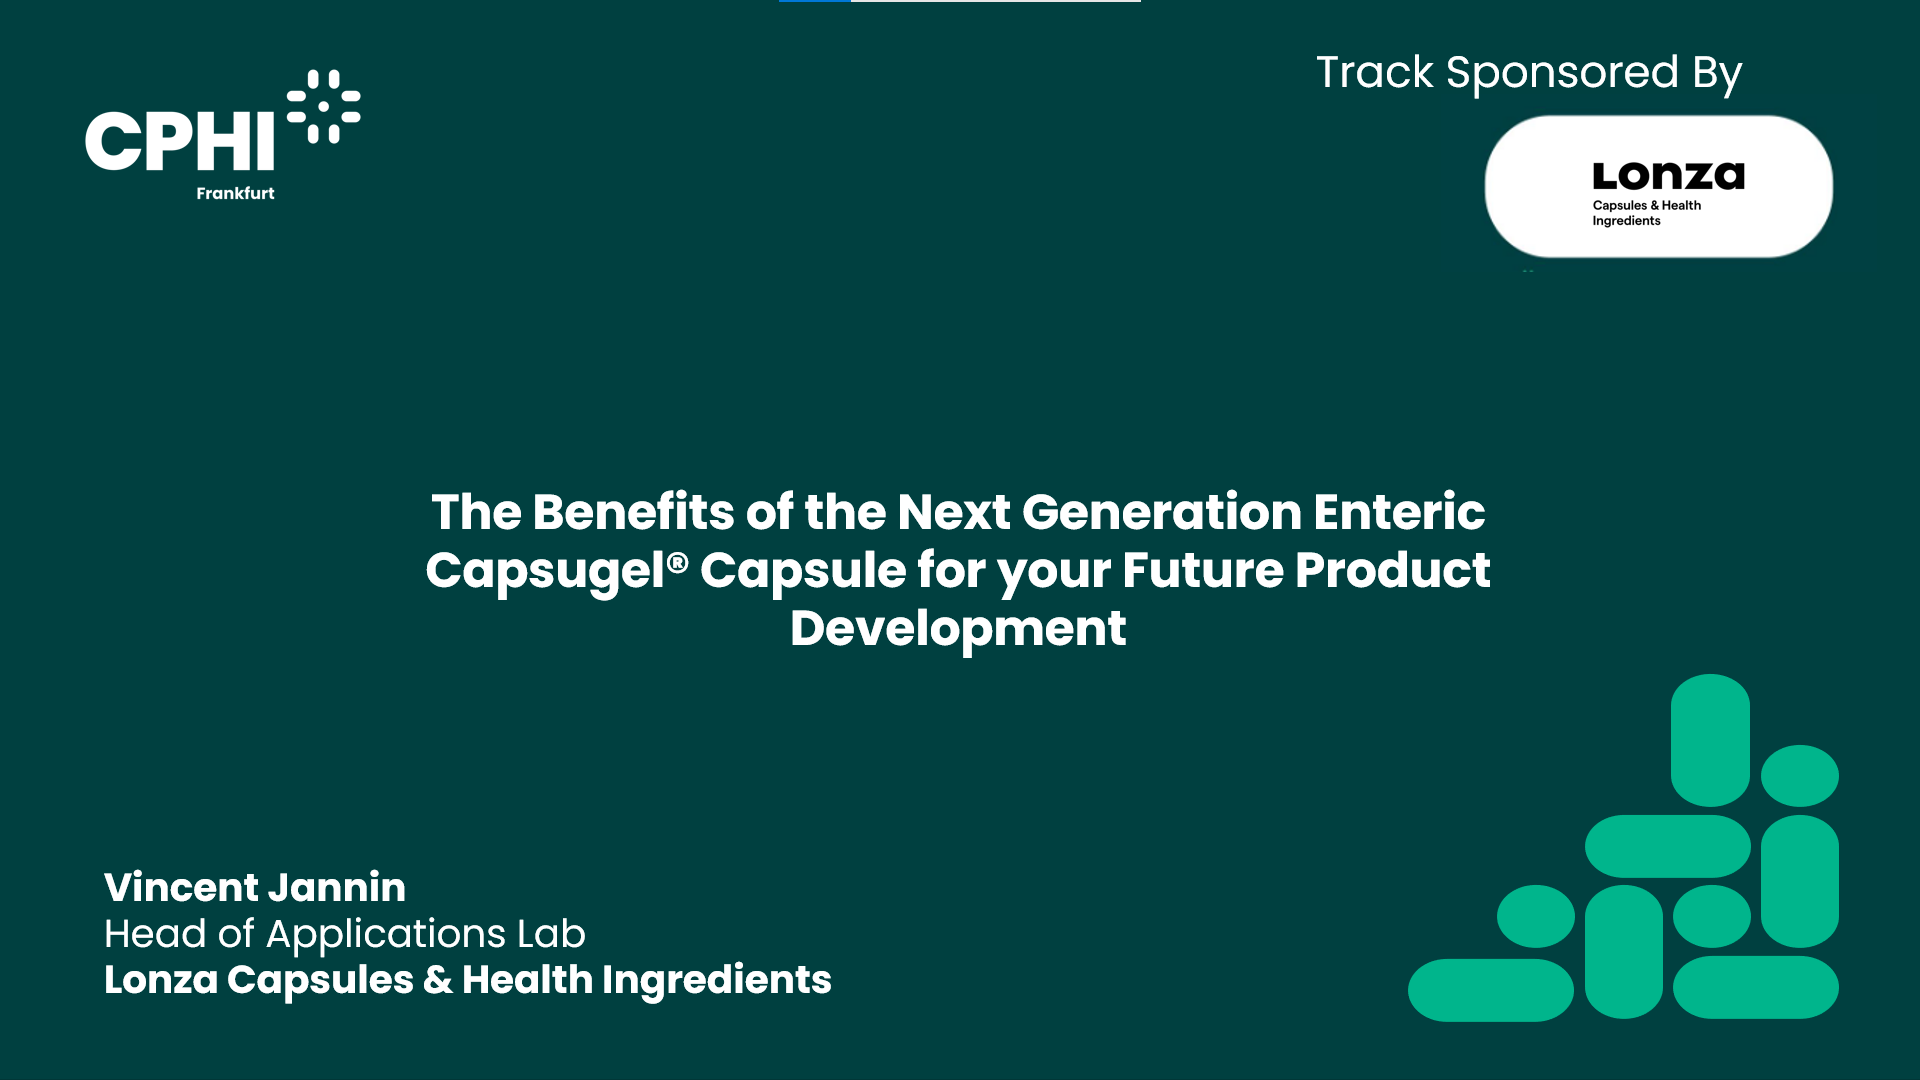 The Benefits of the Next Generation Enteric Capsugel® Capsule for your Future Product Development